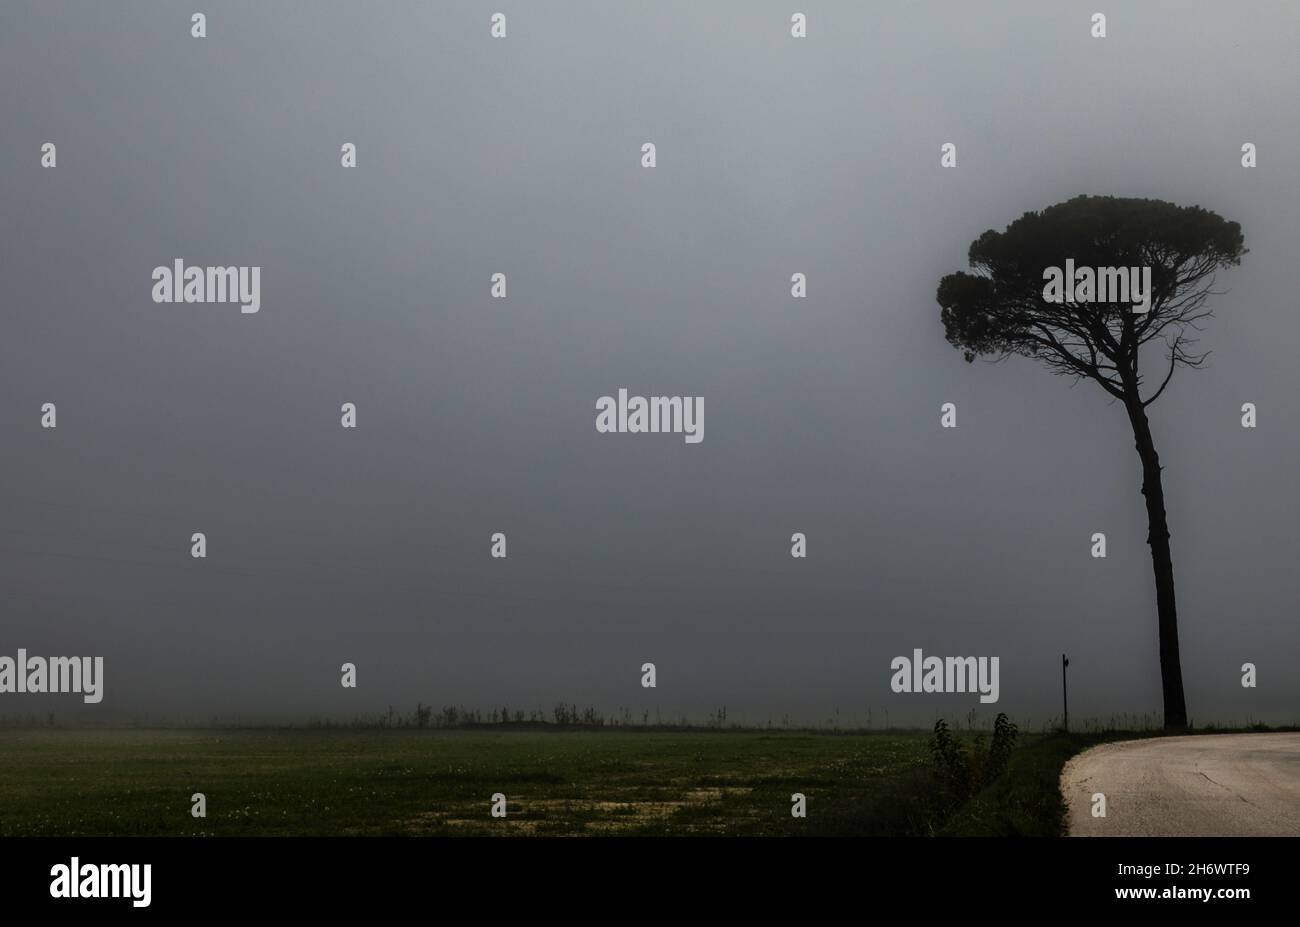 A single Stone Pine tree by a road near Montefalco in the misty Umbrian valley. Stock Photo